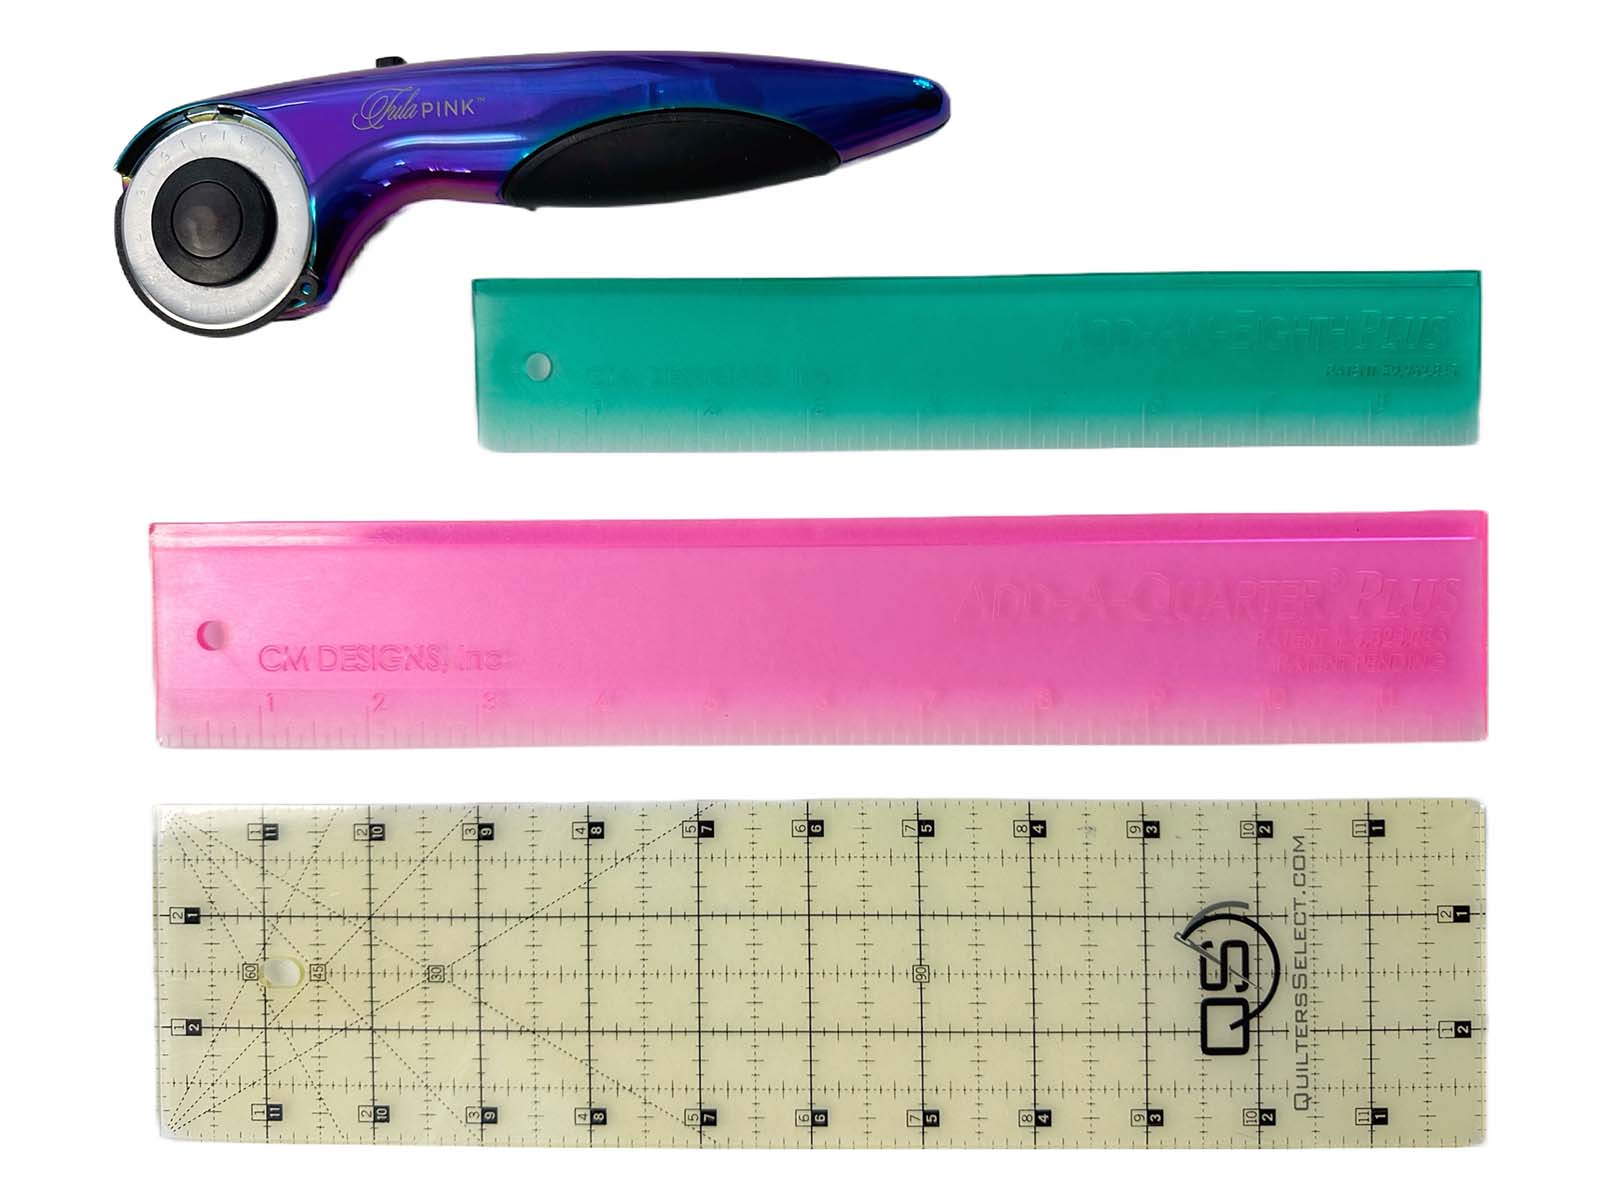 Add A-quarter Ruler A must Have for Foundation Paper Piecing From: CM  Designs 